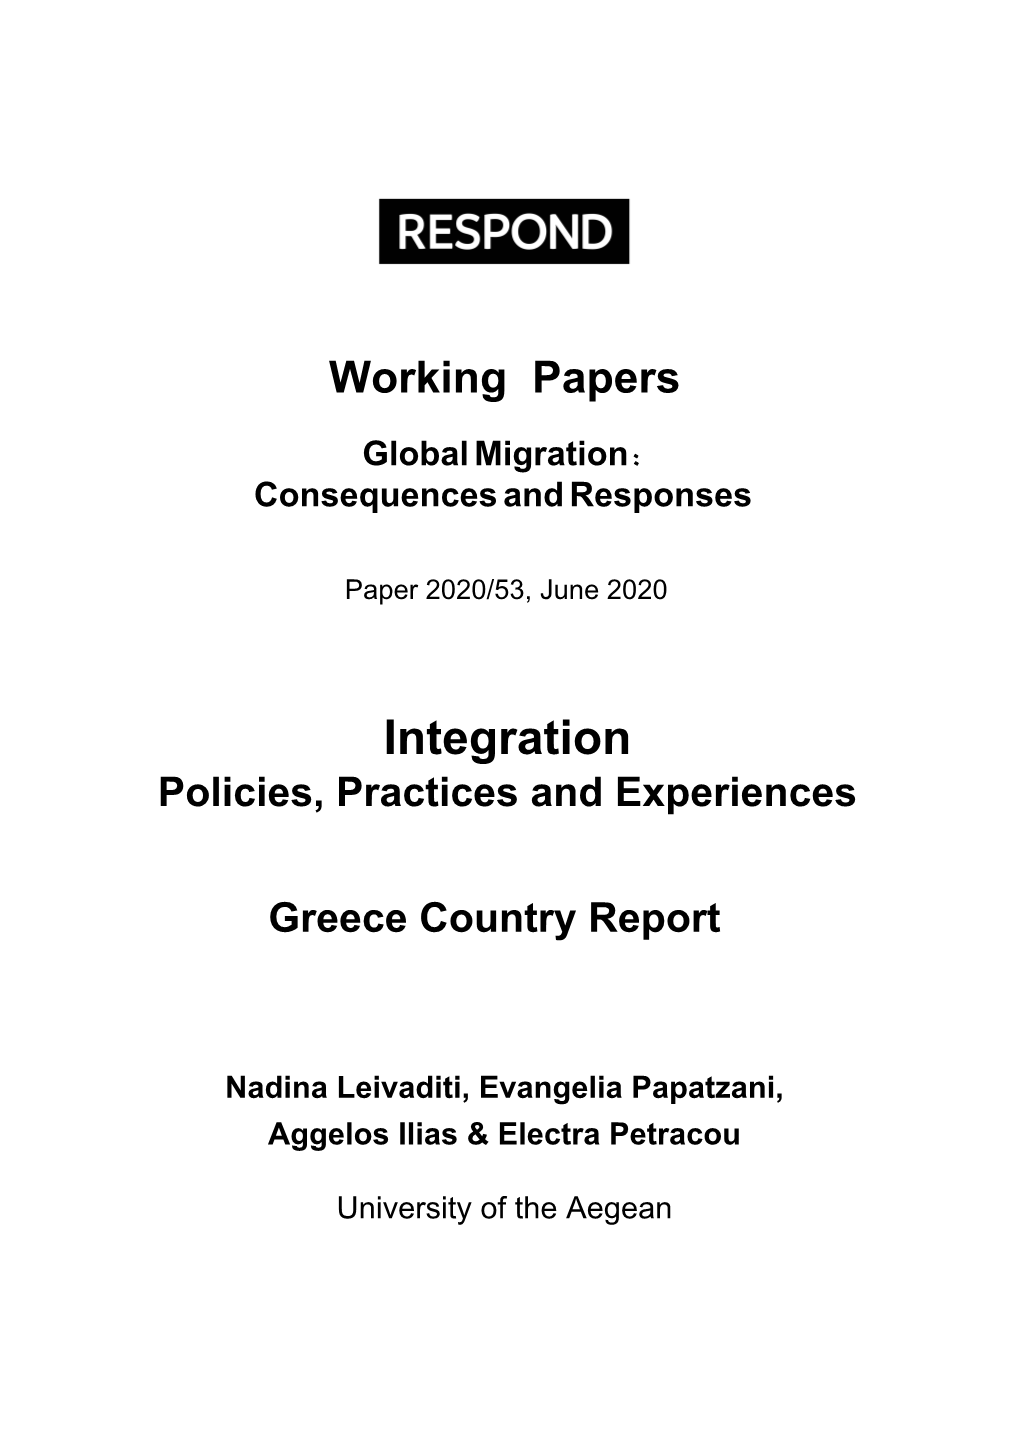 Integration Policies, Practices and Experiences